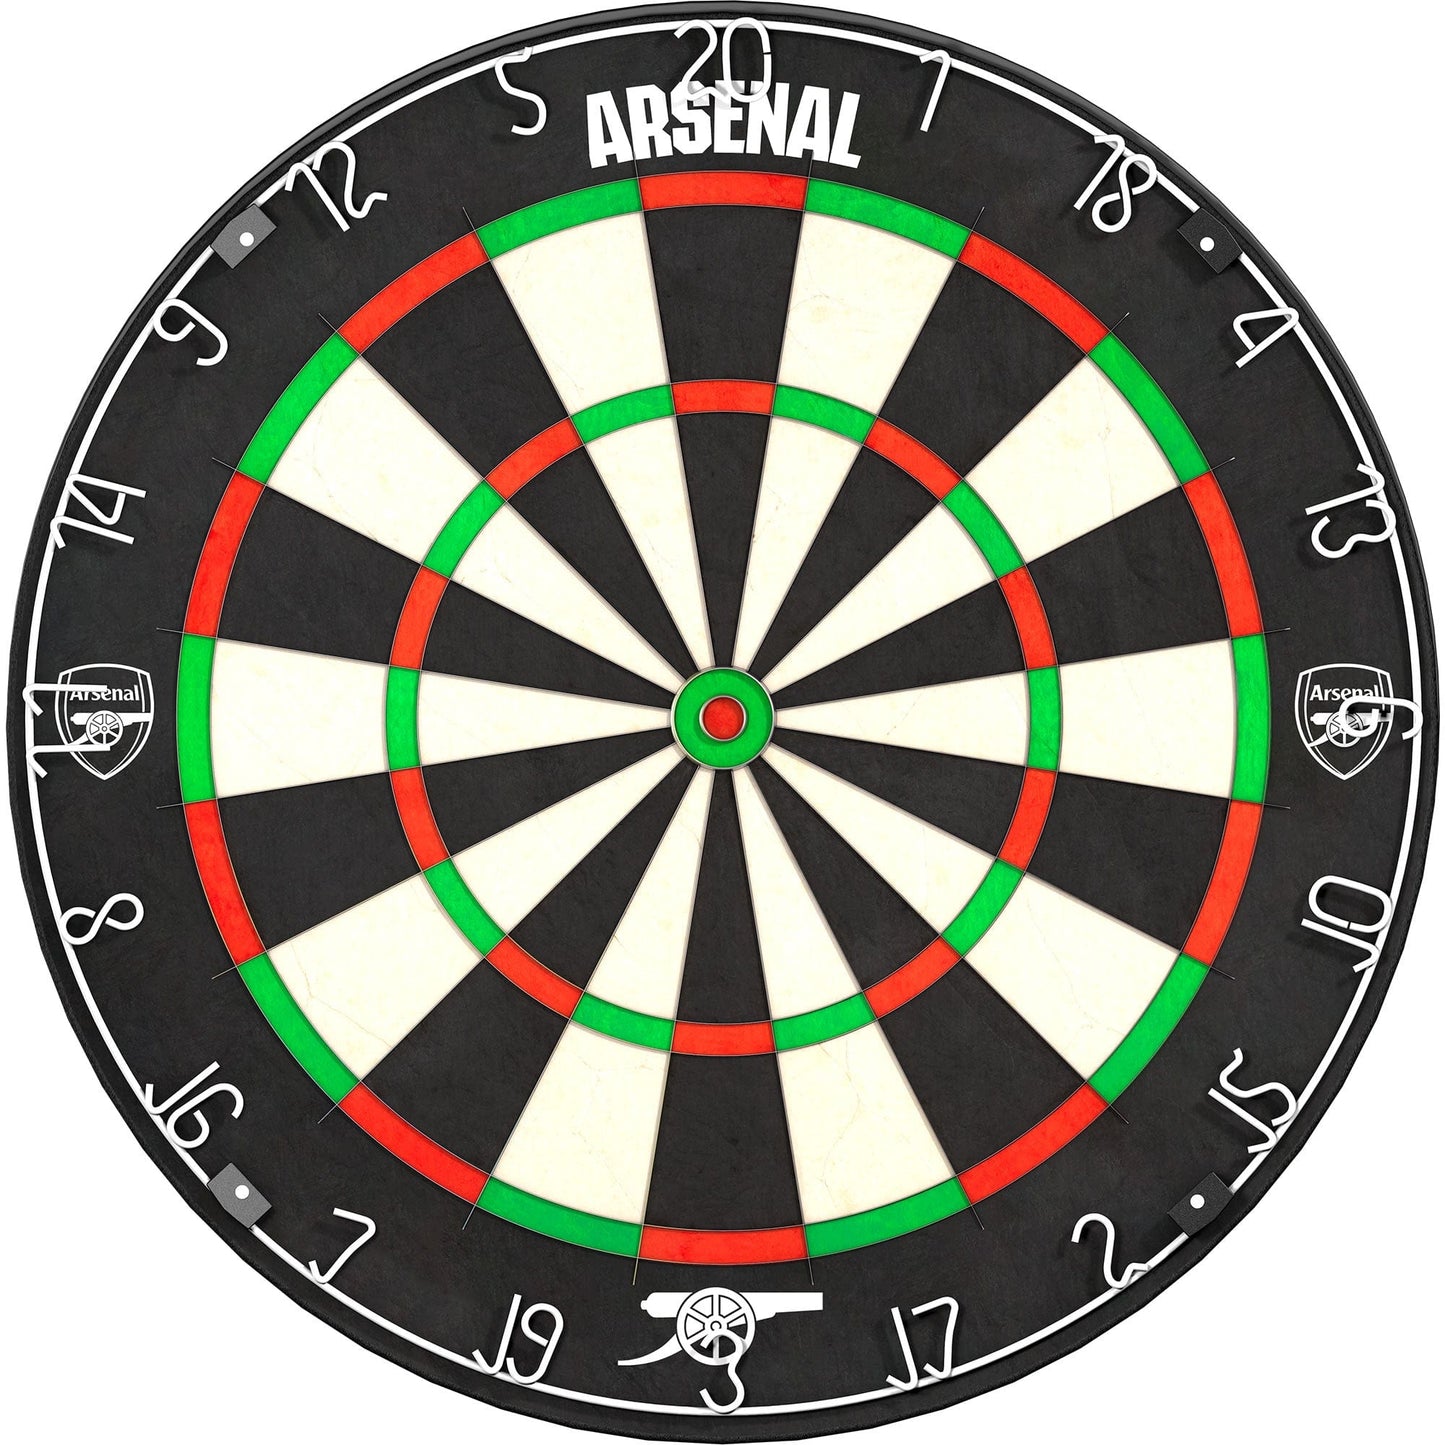 Arsenal FC Dartboard - Professional Level - Official Licensed - The Gunners - Mono Crest